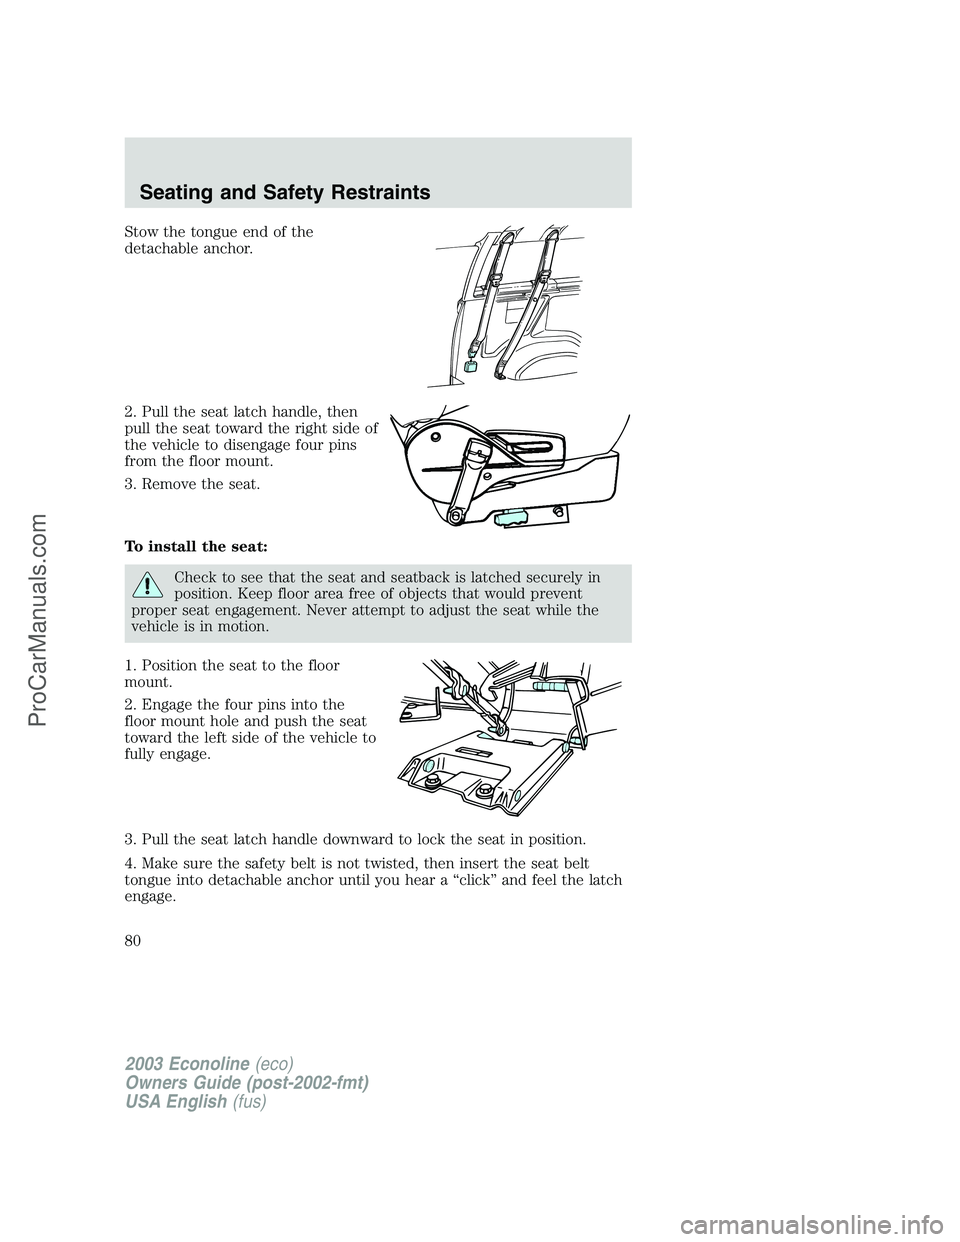 FORD ECONOLINE 2003  Owners Manual Stow the tongue end of the
detachable anchor.
2. Pull the seat latch handle, then
pull the seat toward the right side of
the vehicle to disengage four pins
from the floor mount.
3. Remove the seat.
To